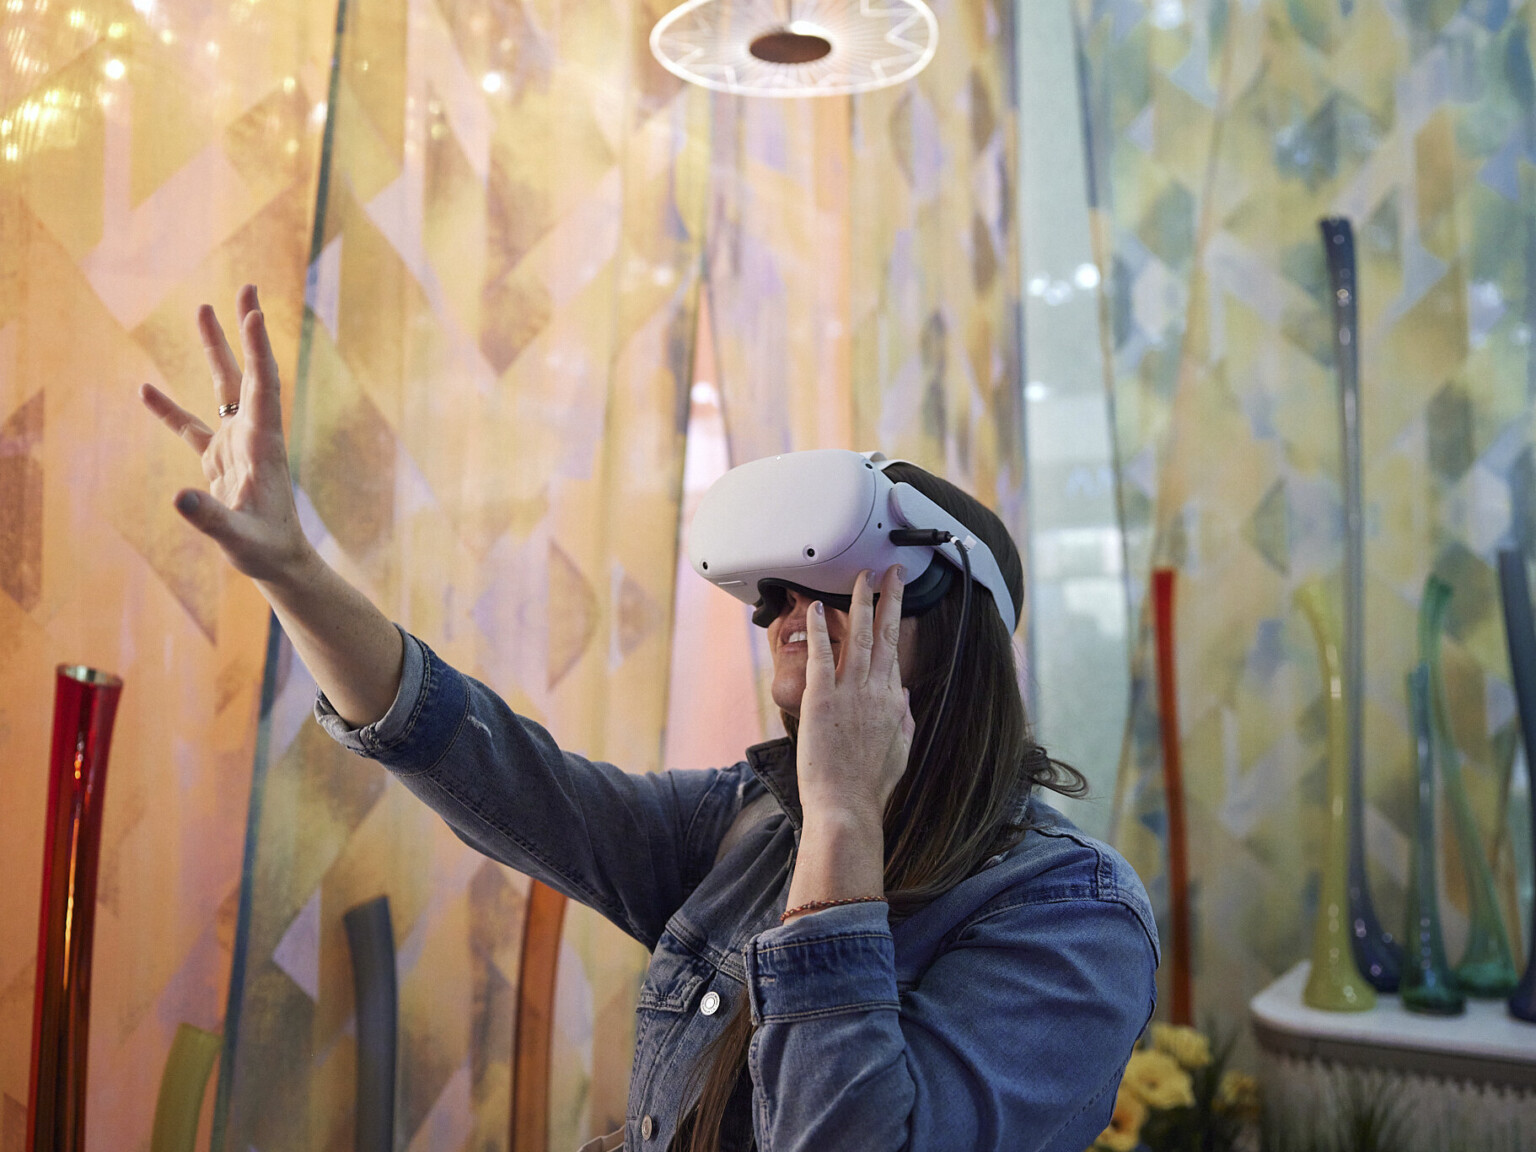 Woman using VR headset reaches out in room with geometric triangular patterned curtains in warm cool tone gradient. Organically shaped vases